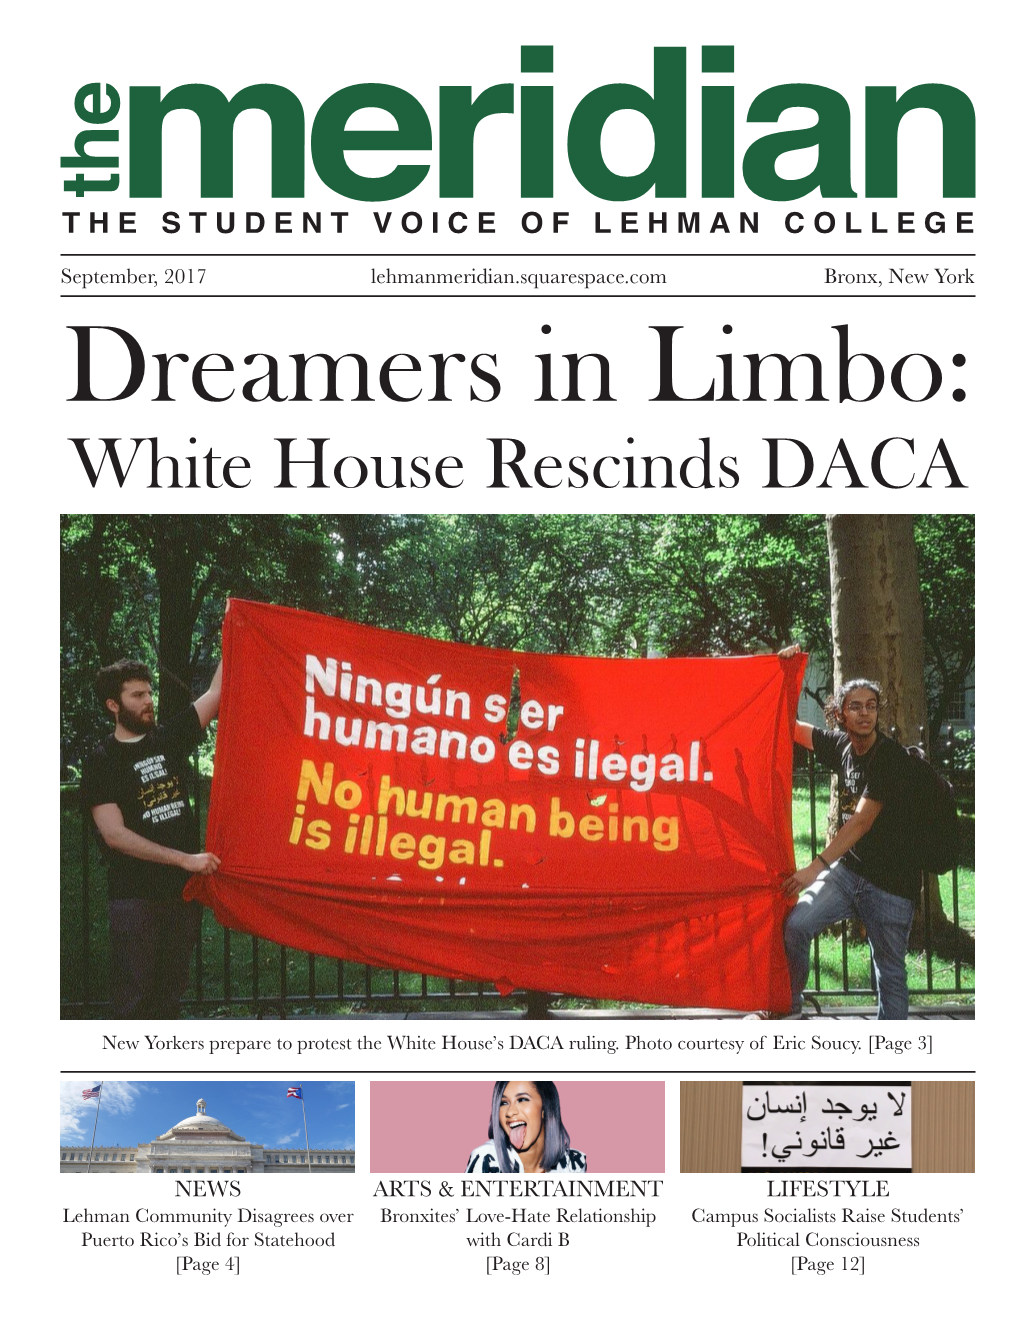 Dreamers in Limbo: White House Rescinds DACA